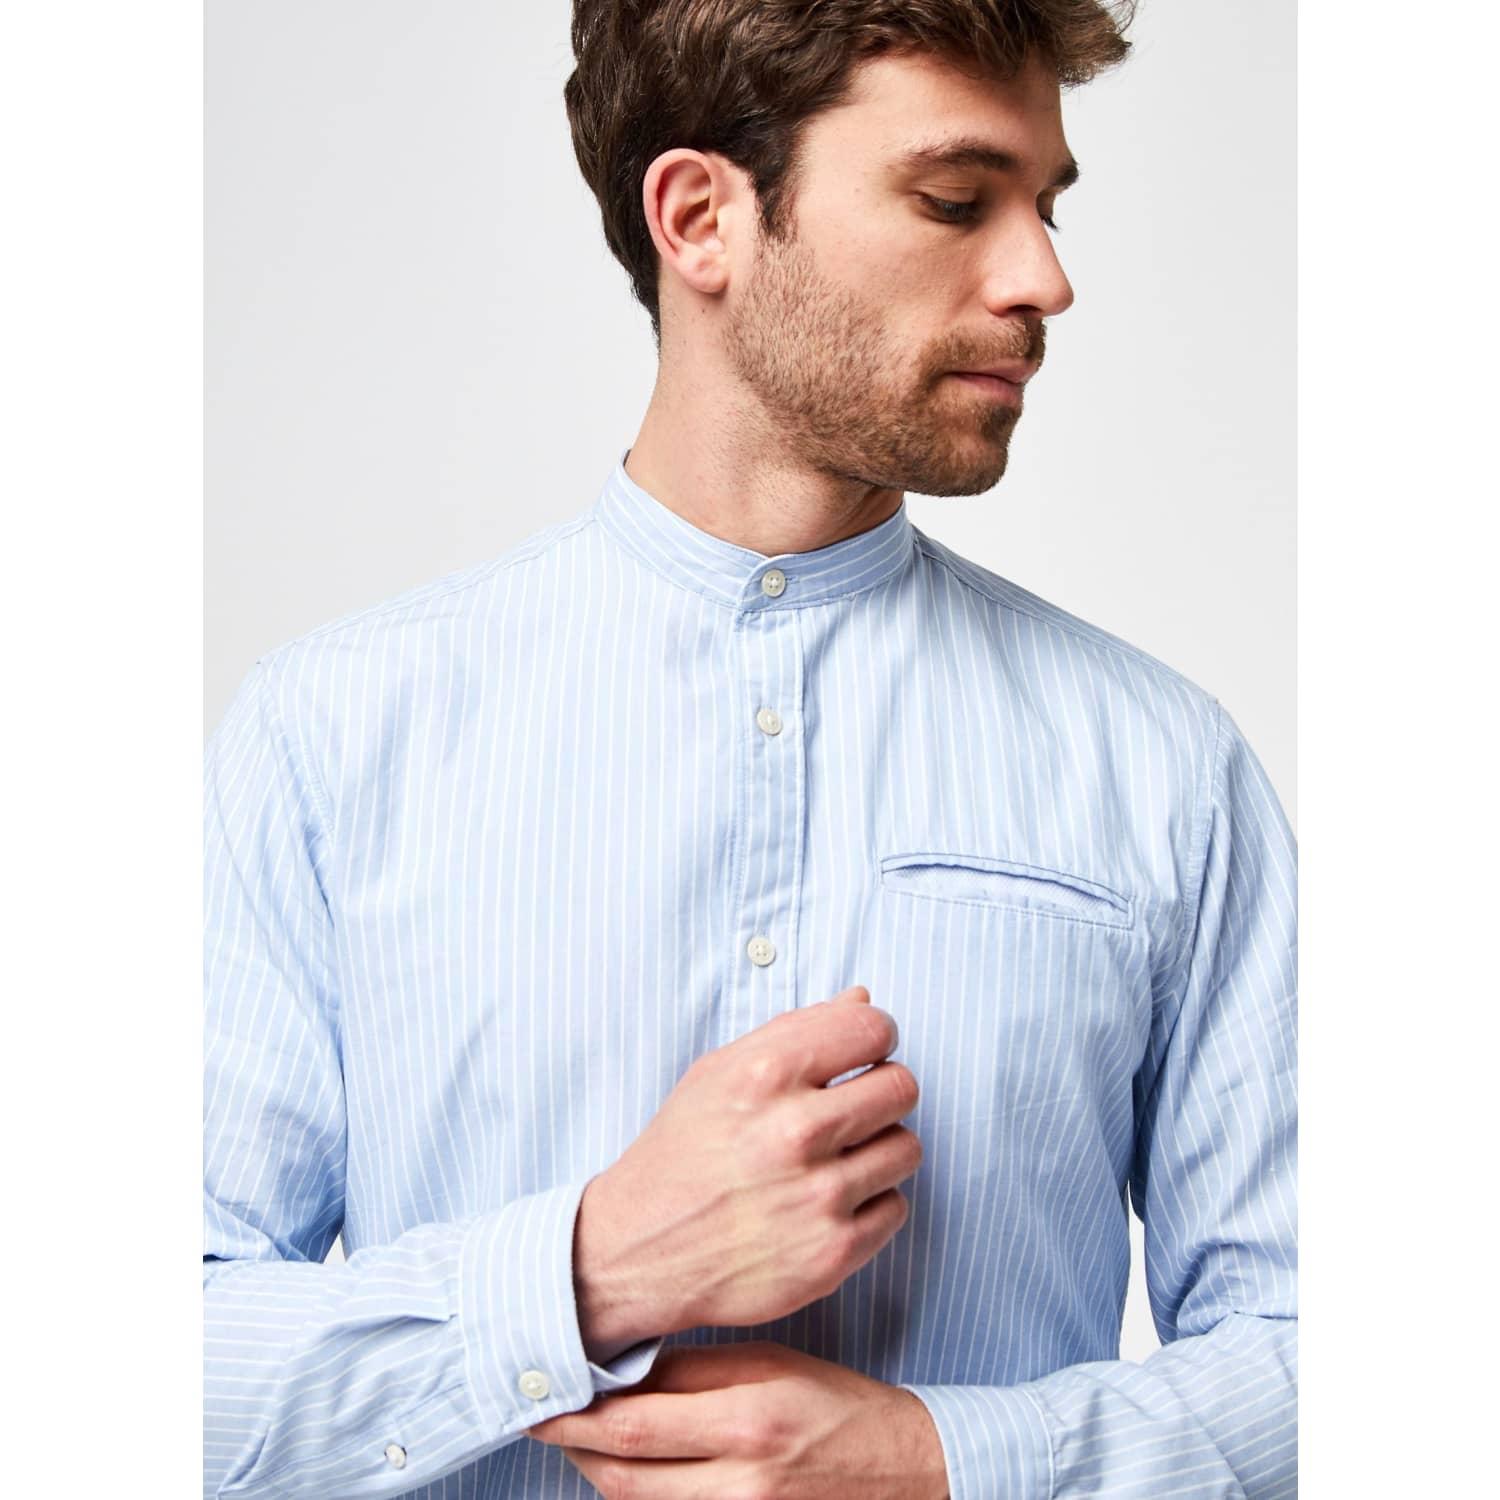 SELECTED Selected Stripe Shirt Collar Mao in Blue for Men - Lyst